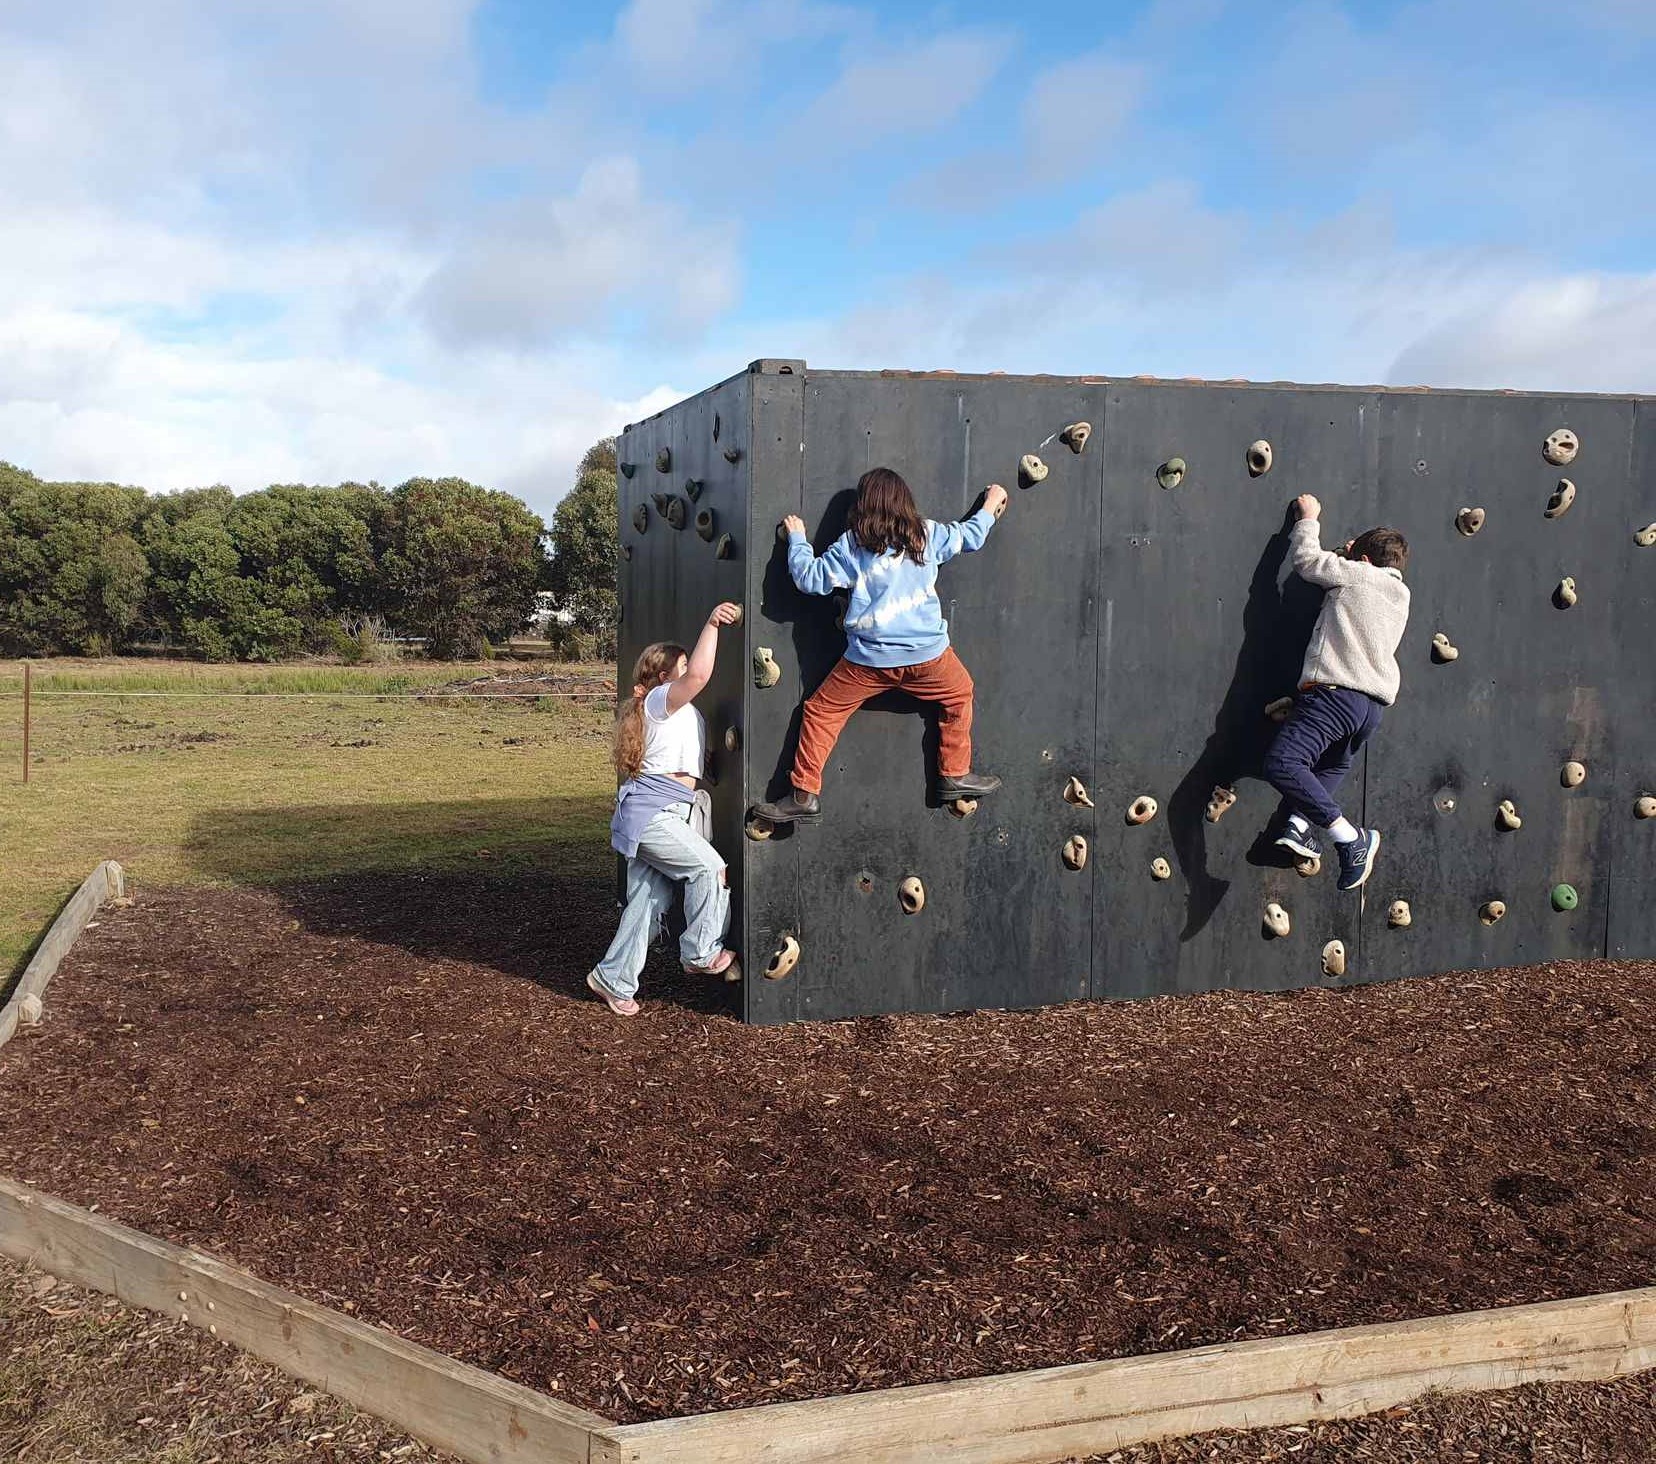 Three Year 5 students are climbing the rock climbing wall on camp